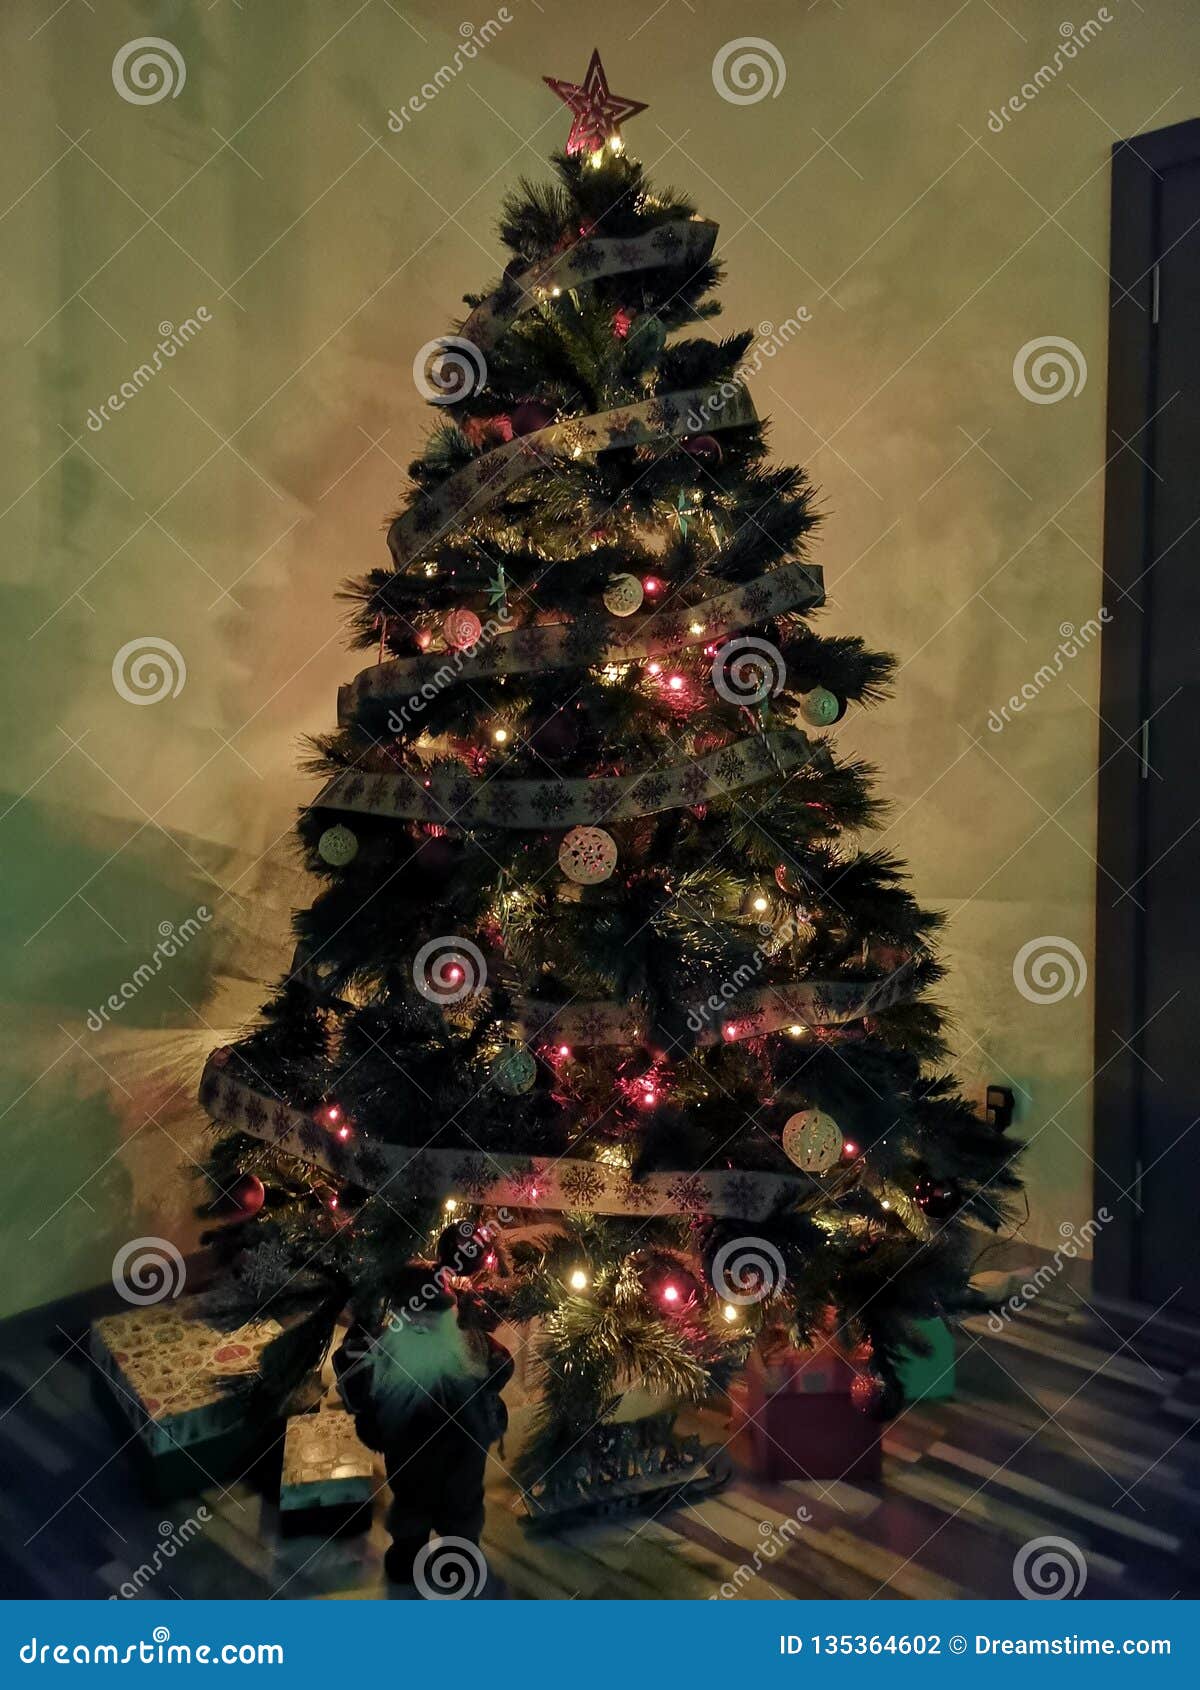 pefrect christmas tree for family time